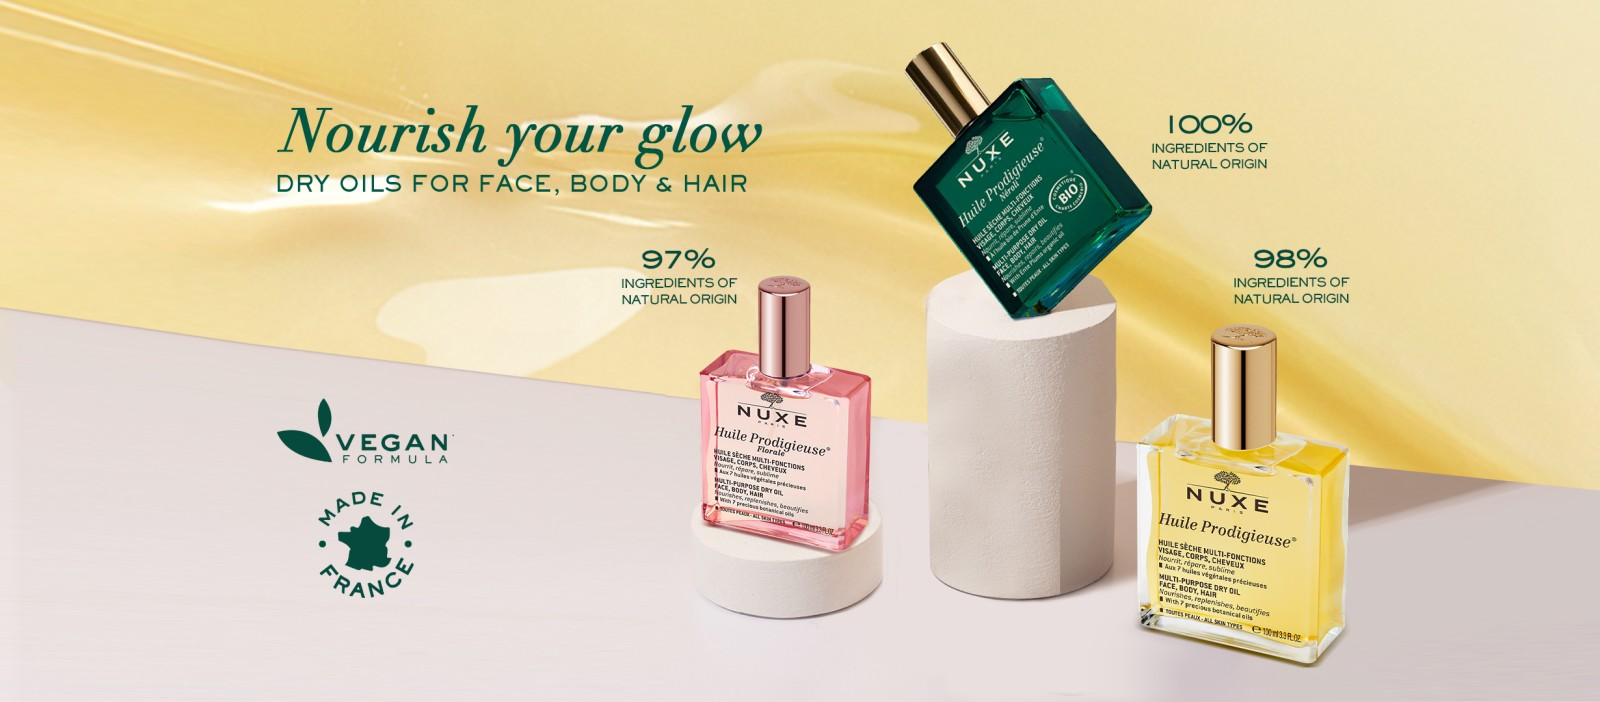 Nuxe UK provides unbeatable deals, offers and cashback on Transform Your Beauty Routine with Nuxe UK's Best Sellers via OODLZ.